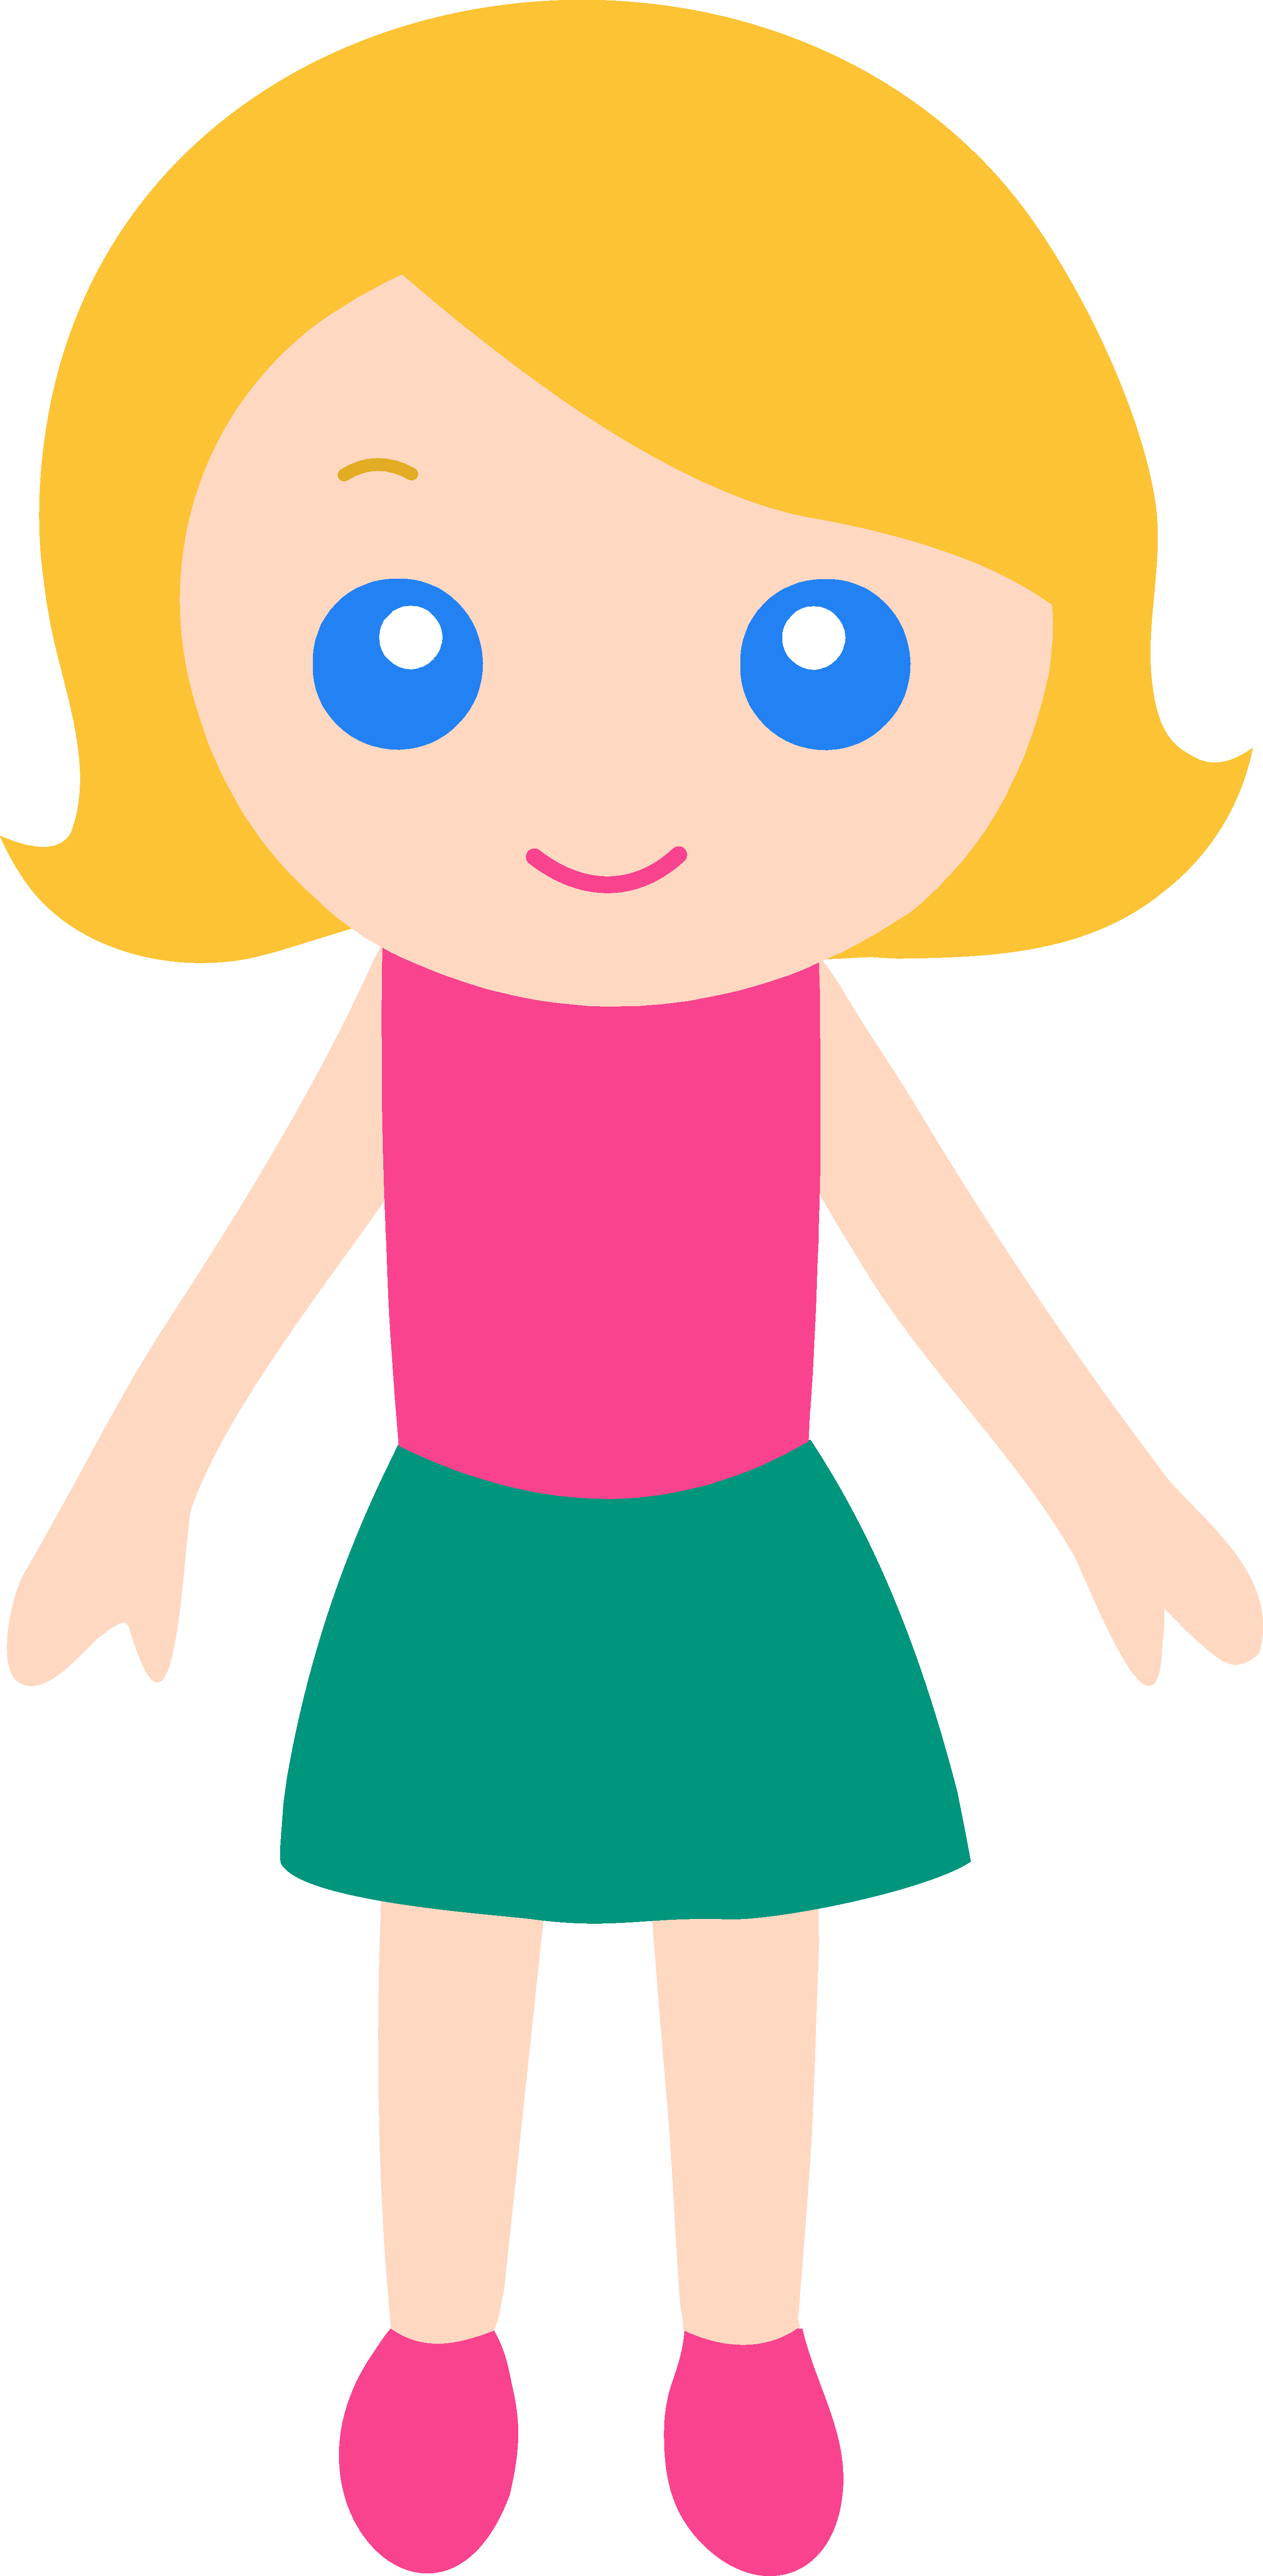 free-woman-character-cliparts-download-free-woman-character-cliparts